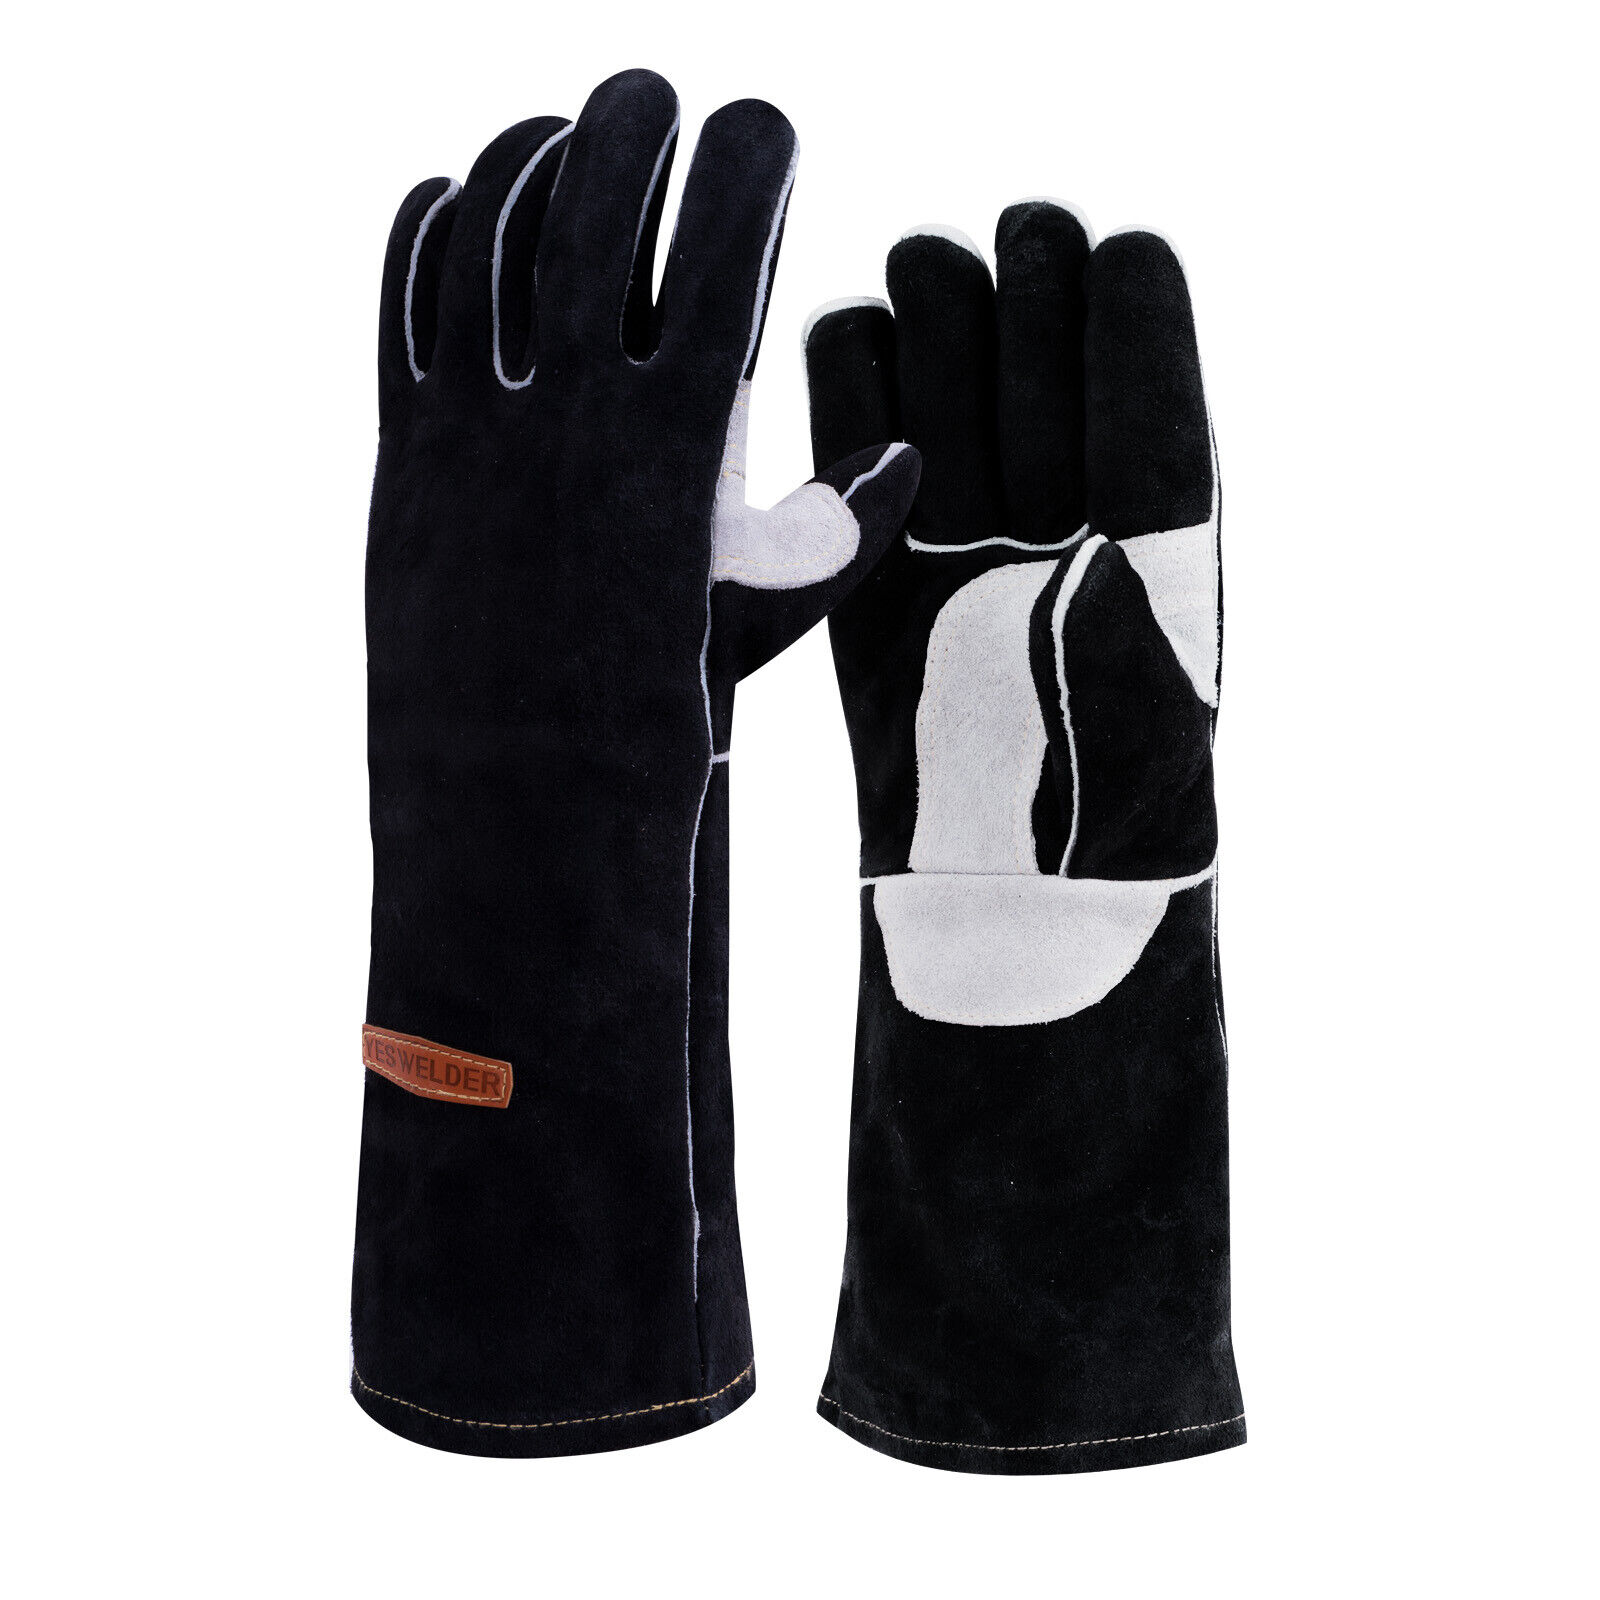 Leather Forge MIG Welding Gloves, Heat Fire Resistant Welders Gloves, 14”